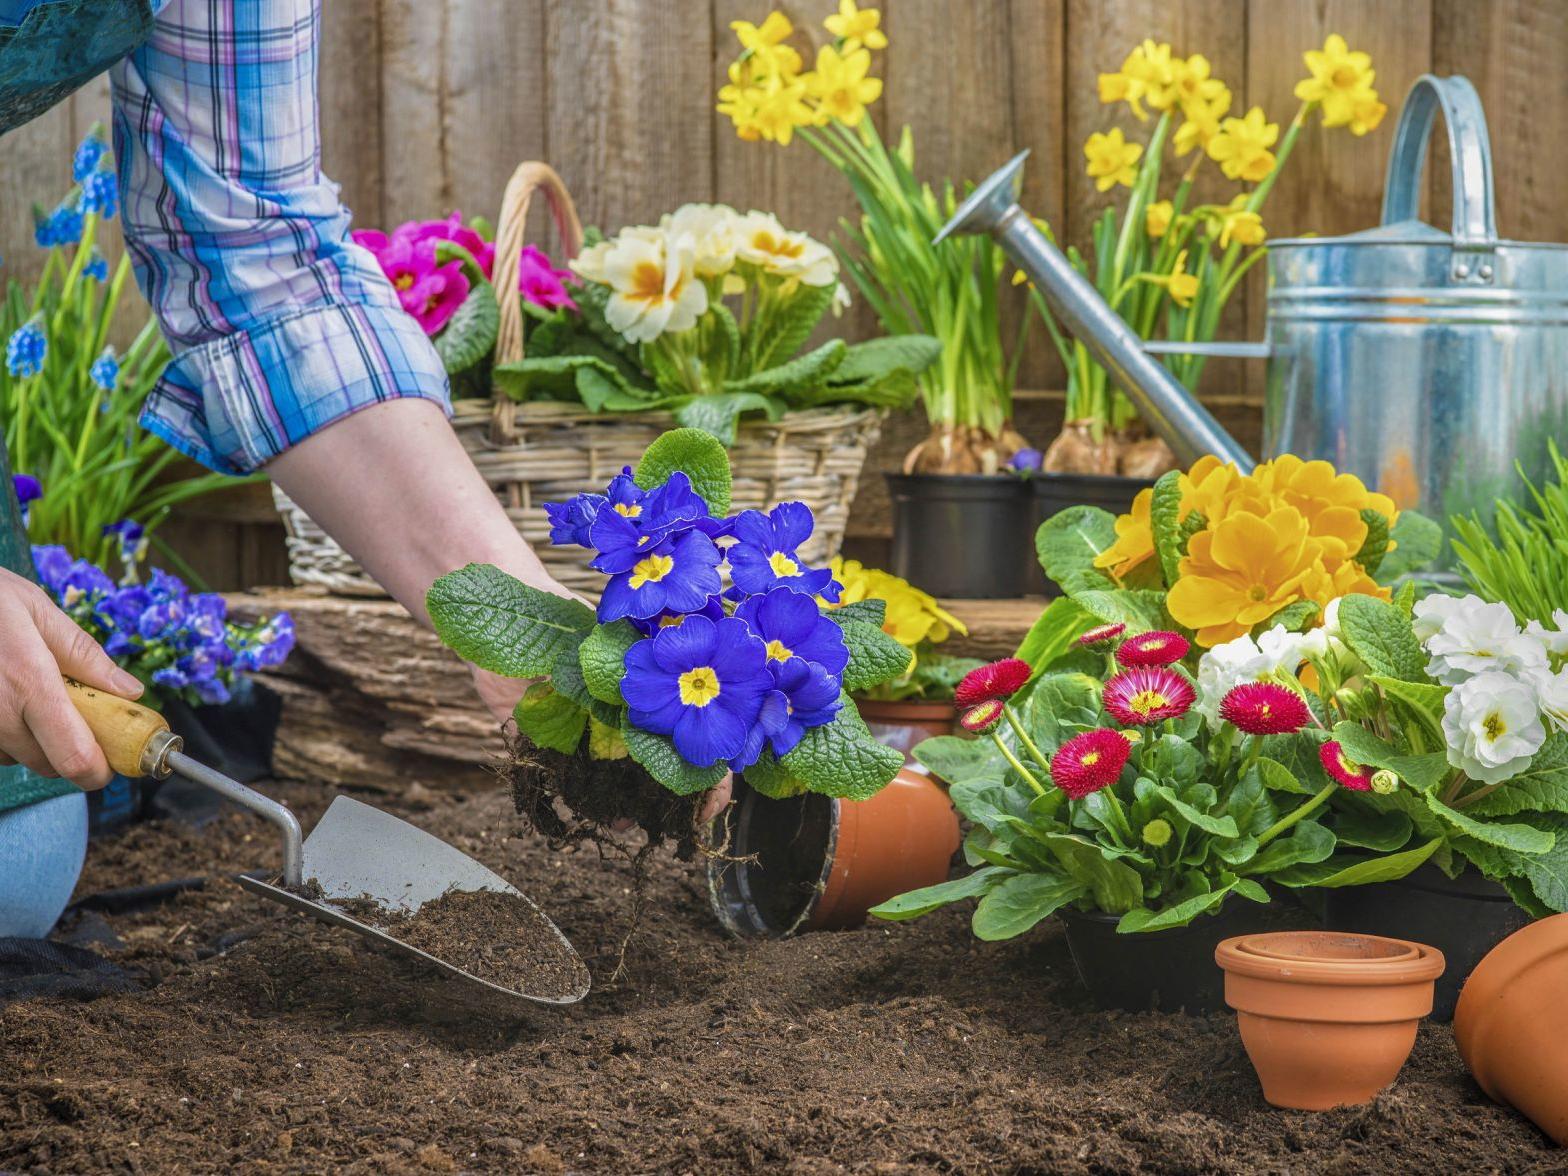 various flowers and plants being put in the ground by a person